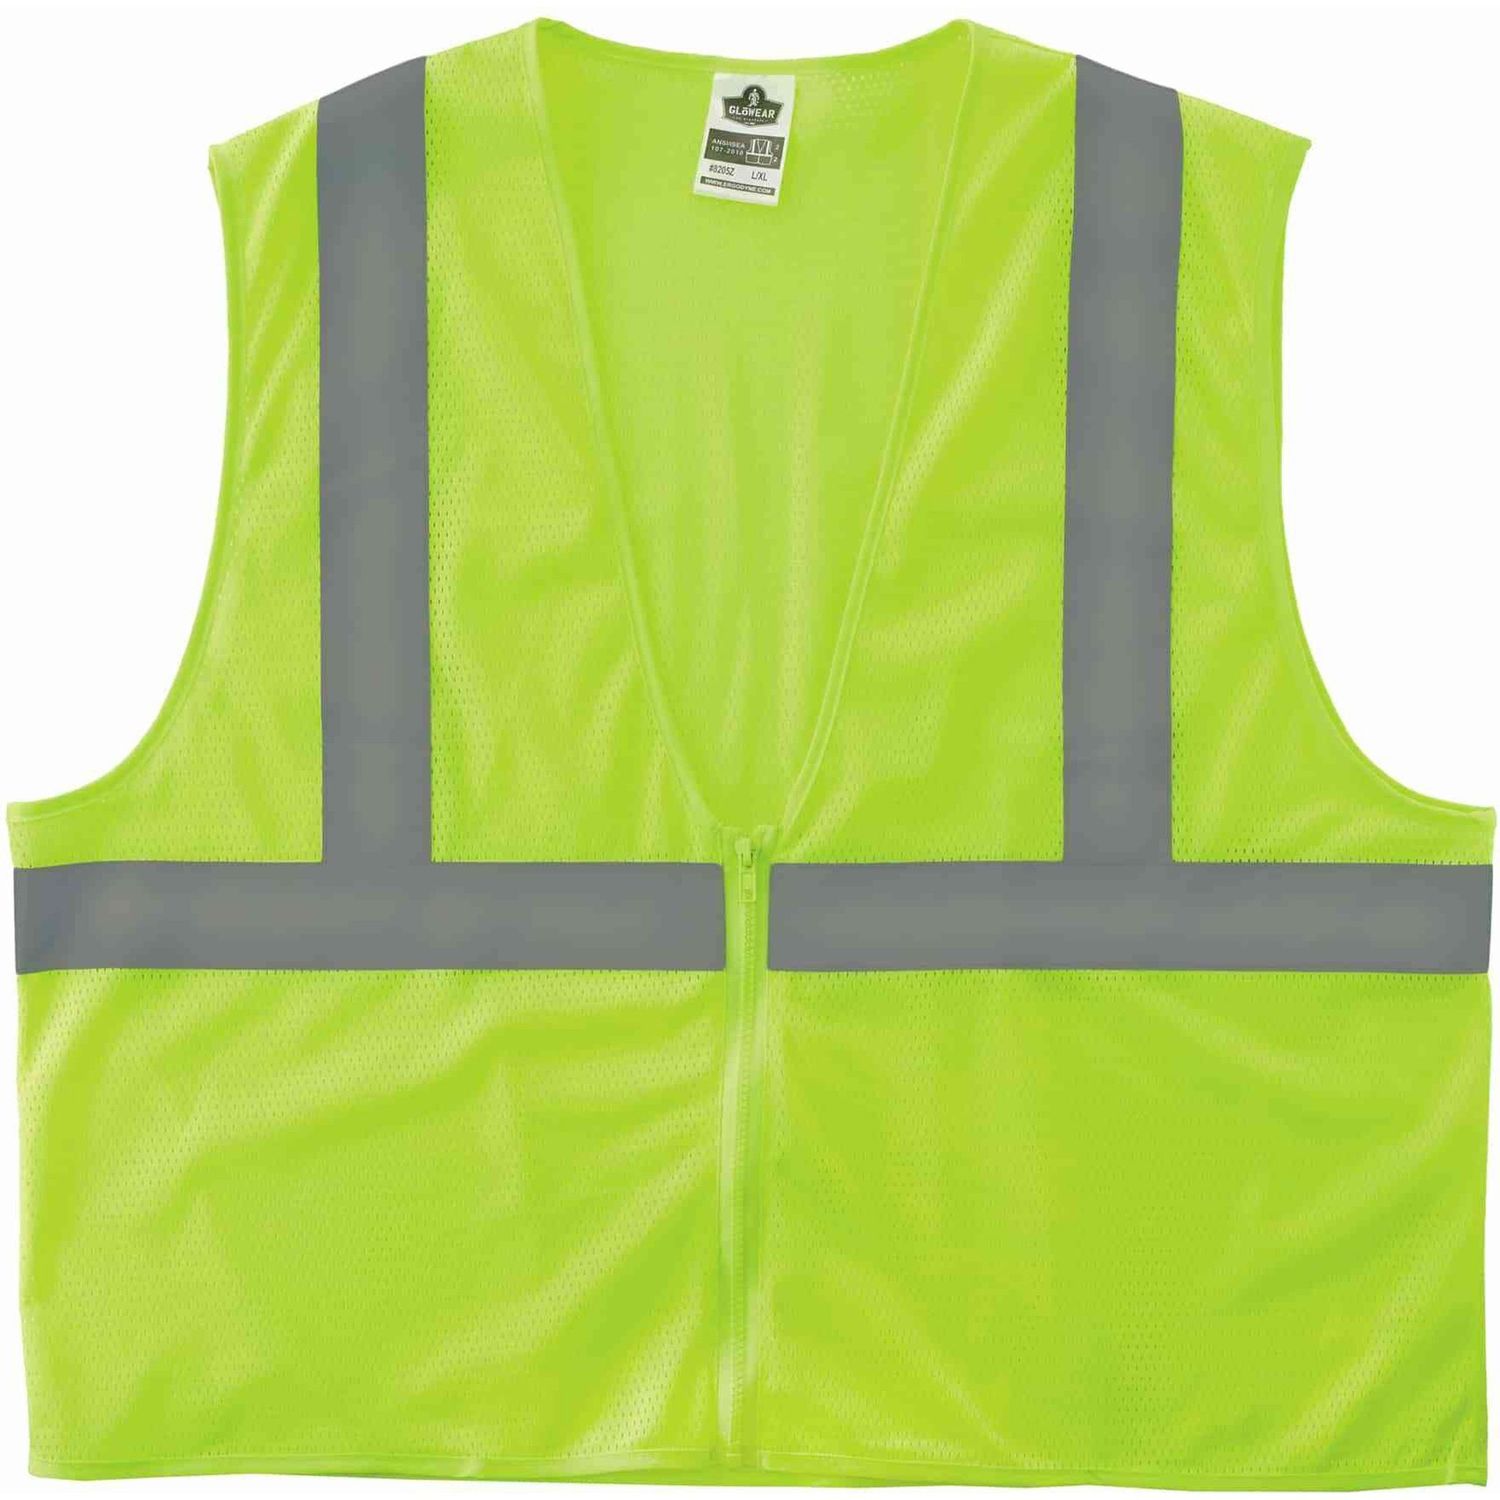 Type R C2 Super Econo Mesh Vest Recommended for: Utility, Construction, Baggage Handling, Emergency, Warehouse, Reflective, Breathable, Lightweight, High Visibility, Machine Washable